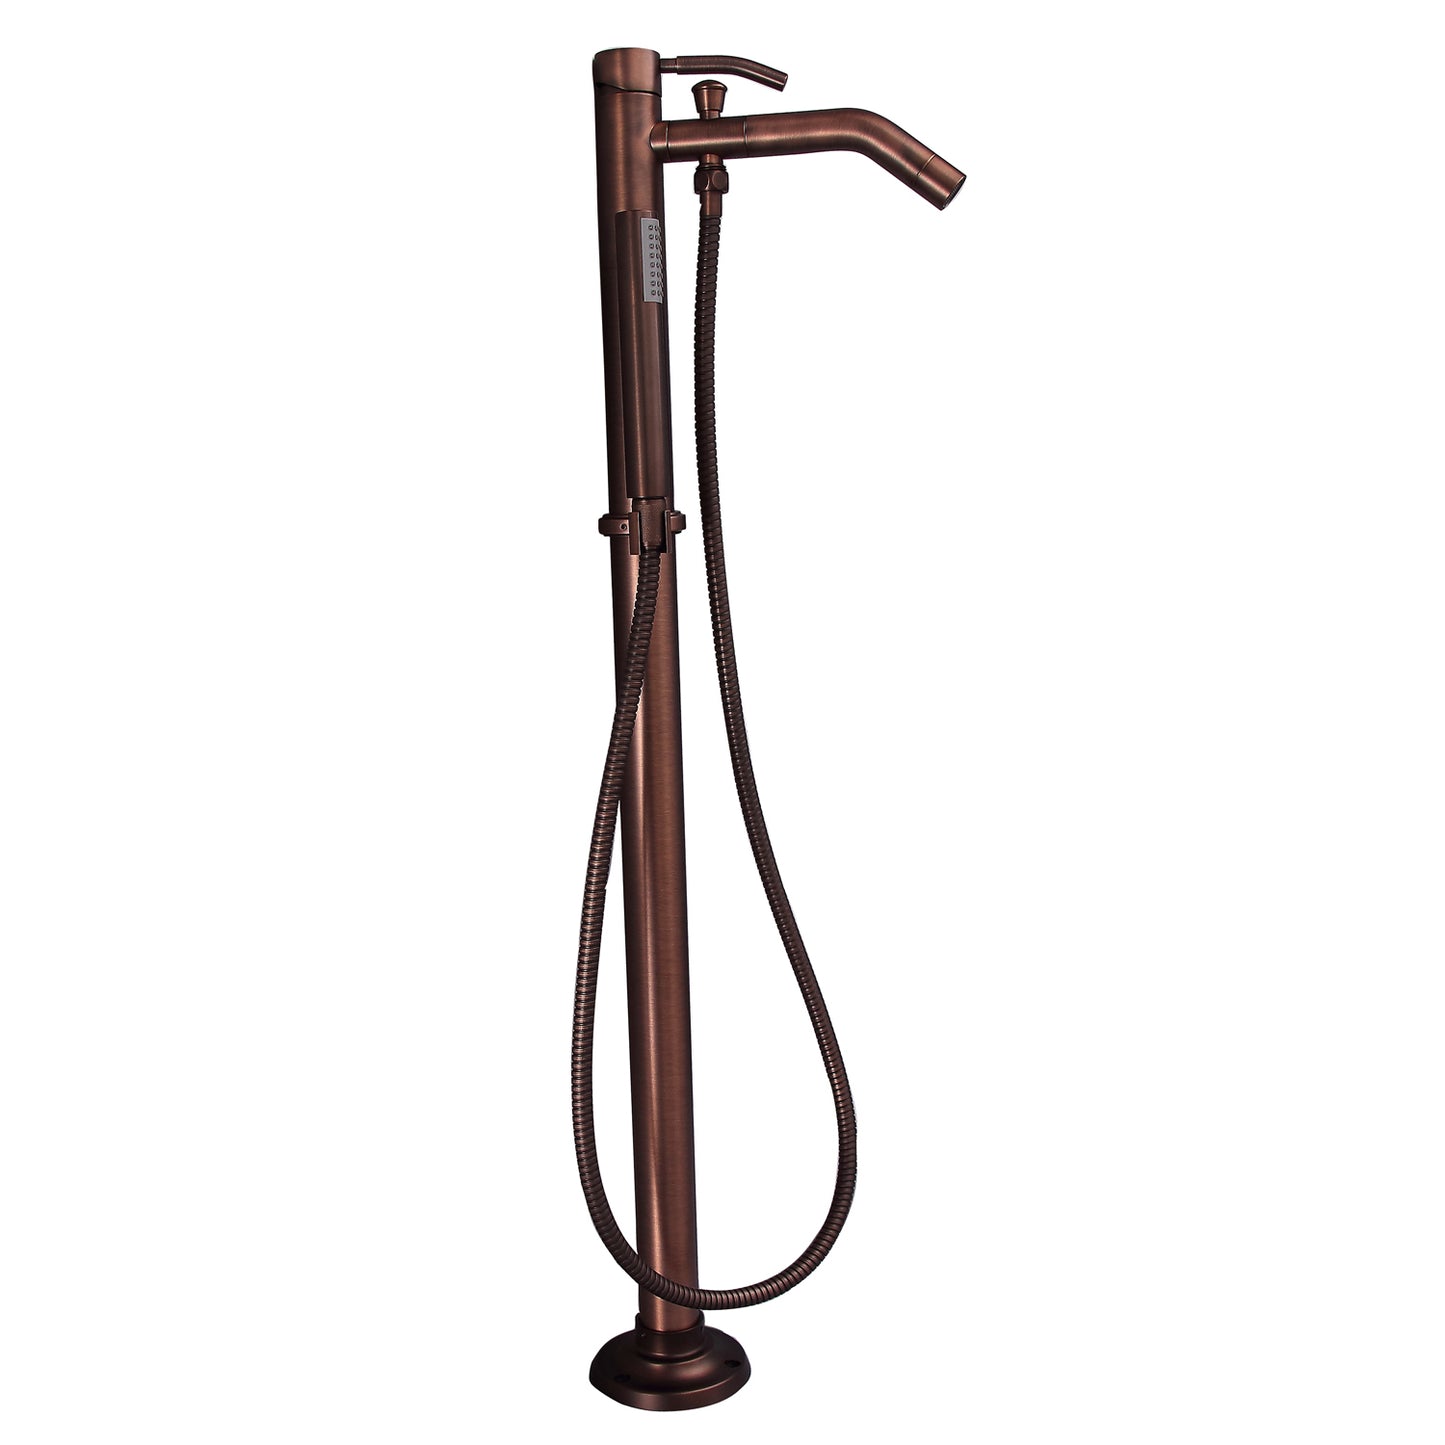 Madon Contemporary Floor-Mount Tub Faucet with Hand Shower Oil-Rubbed Bronze